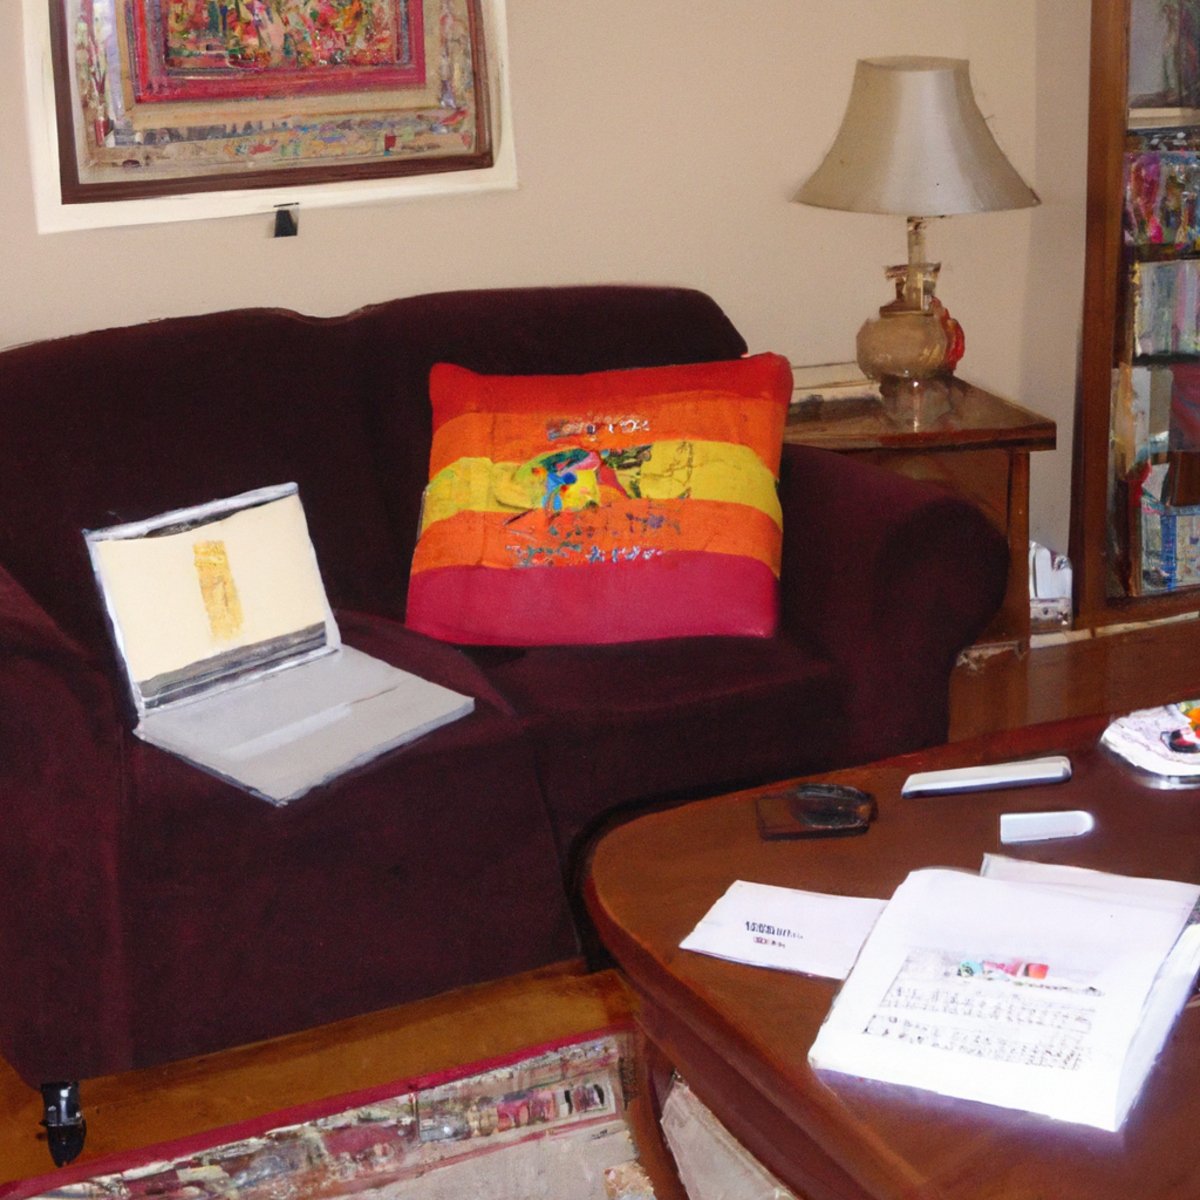 Warm and inviting living room with resources on Hurler Syndrome, including books, pamphlets, and a laptop for online support.